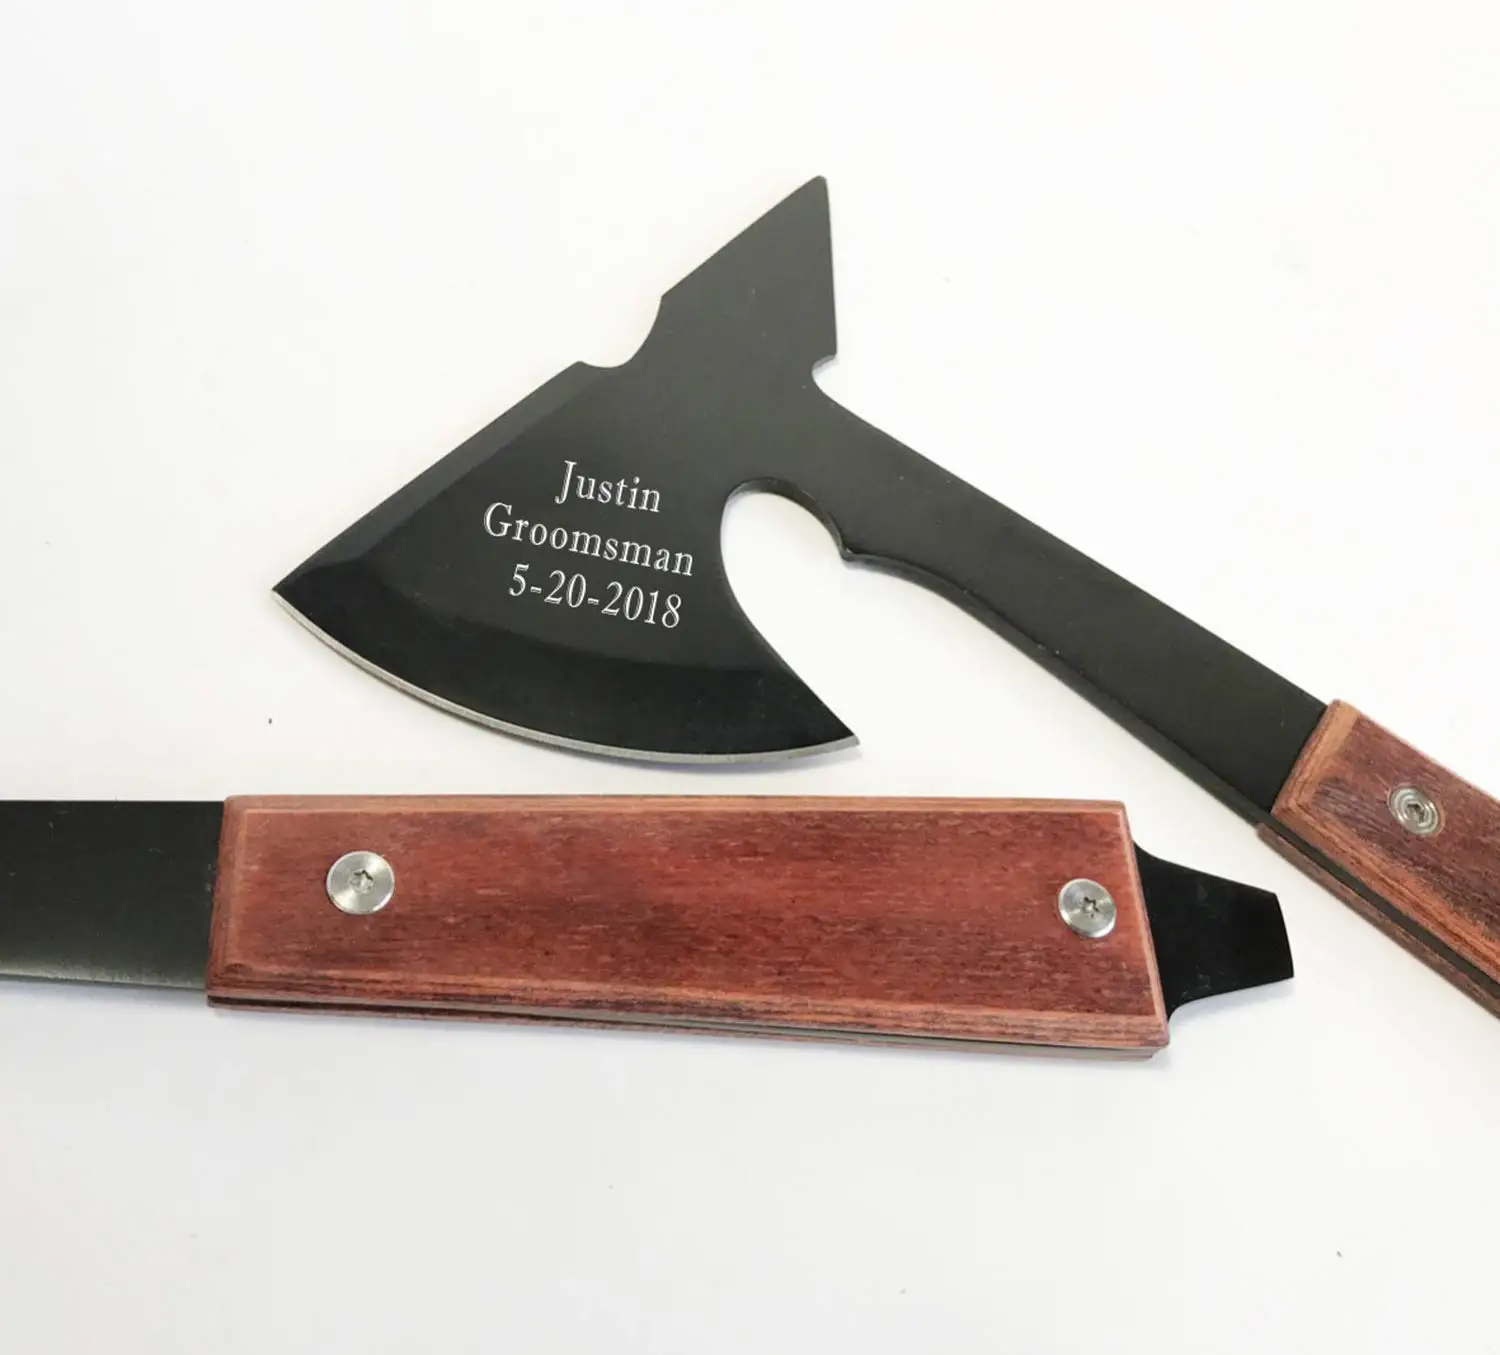 Groomsmen Gifts-Personalized Engraved Custom Axes for Men Set of 9 Personalized Hatchet Axes Groomsman for him With Rosewood Handle